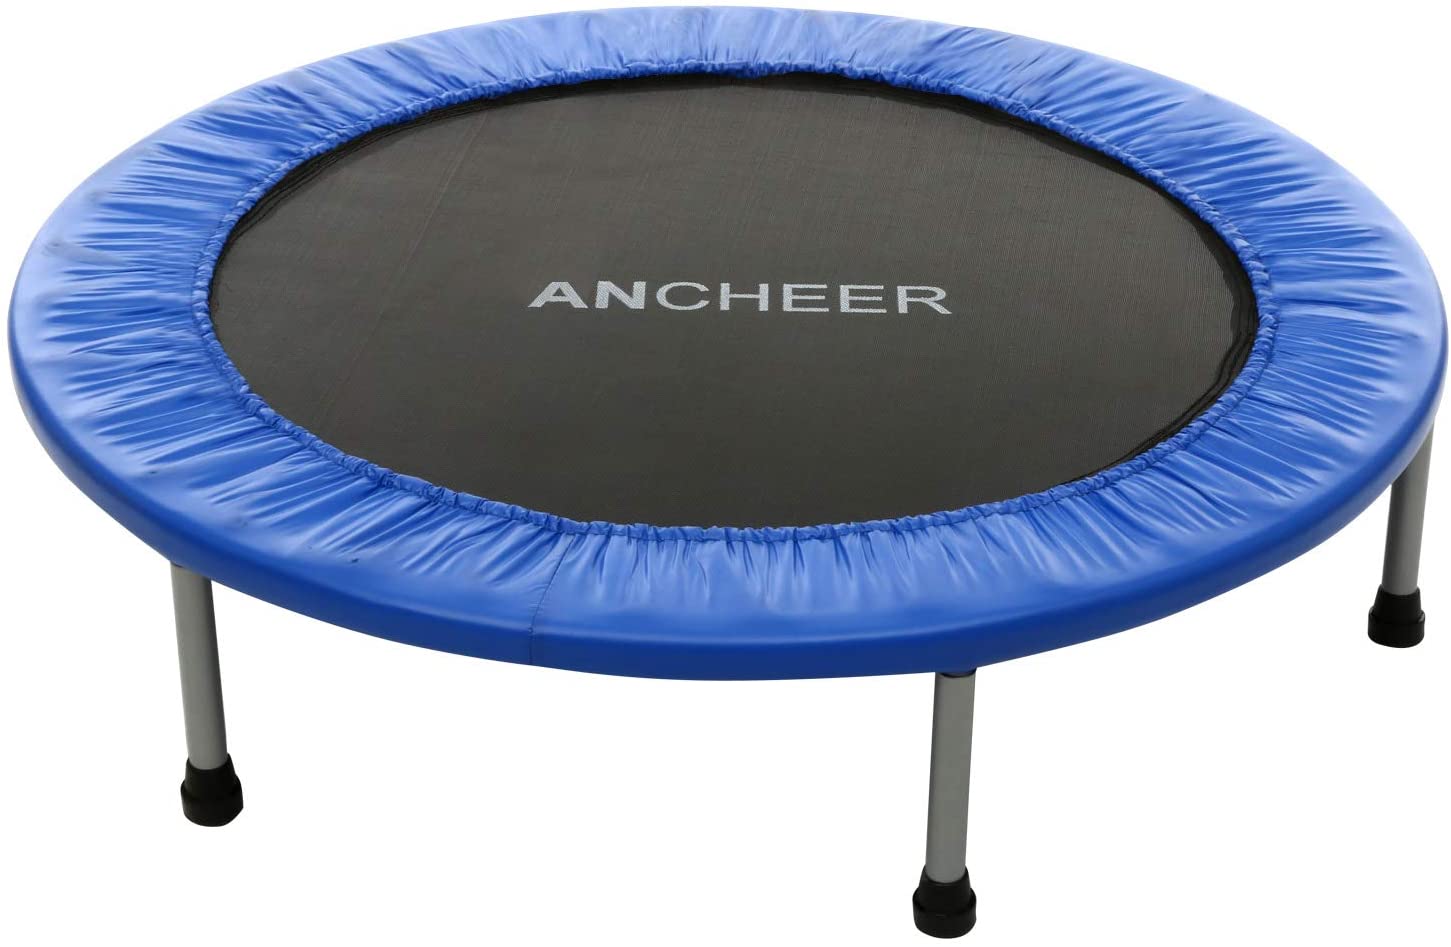 ANCHEER Rebounder Trampoline 38-40 inch for Adults and Kids